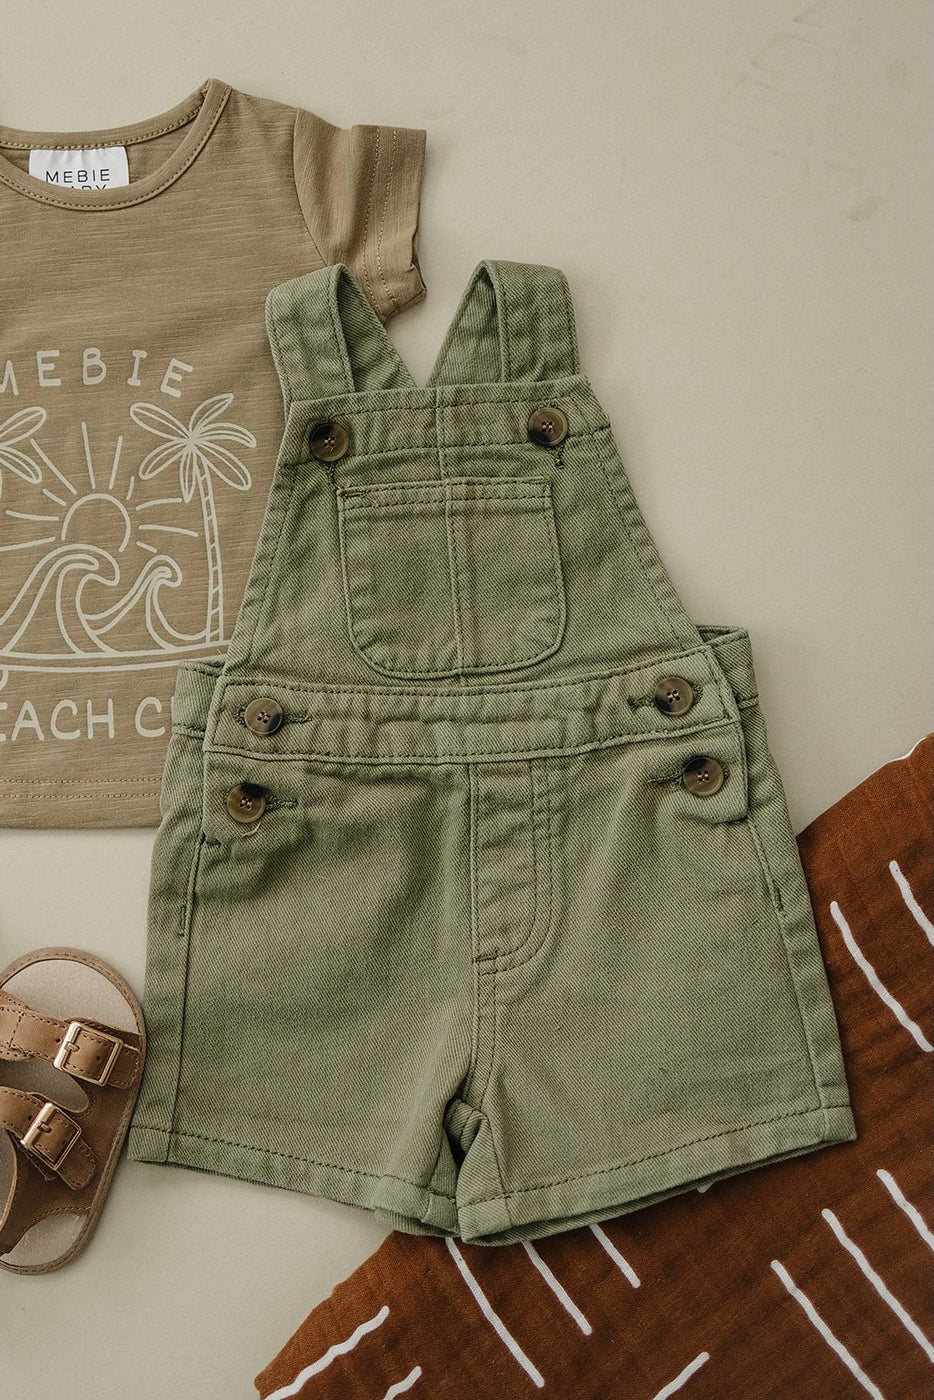 a green overalls and sandals